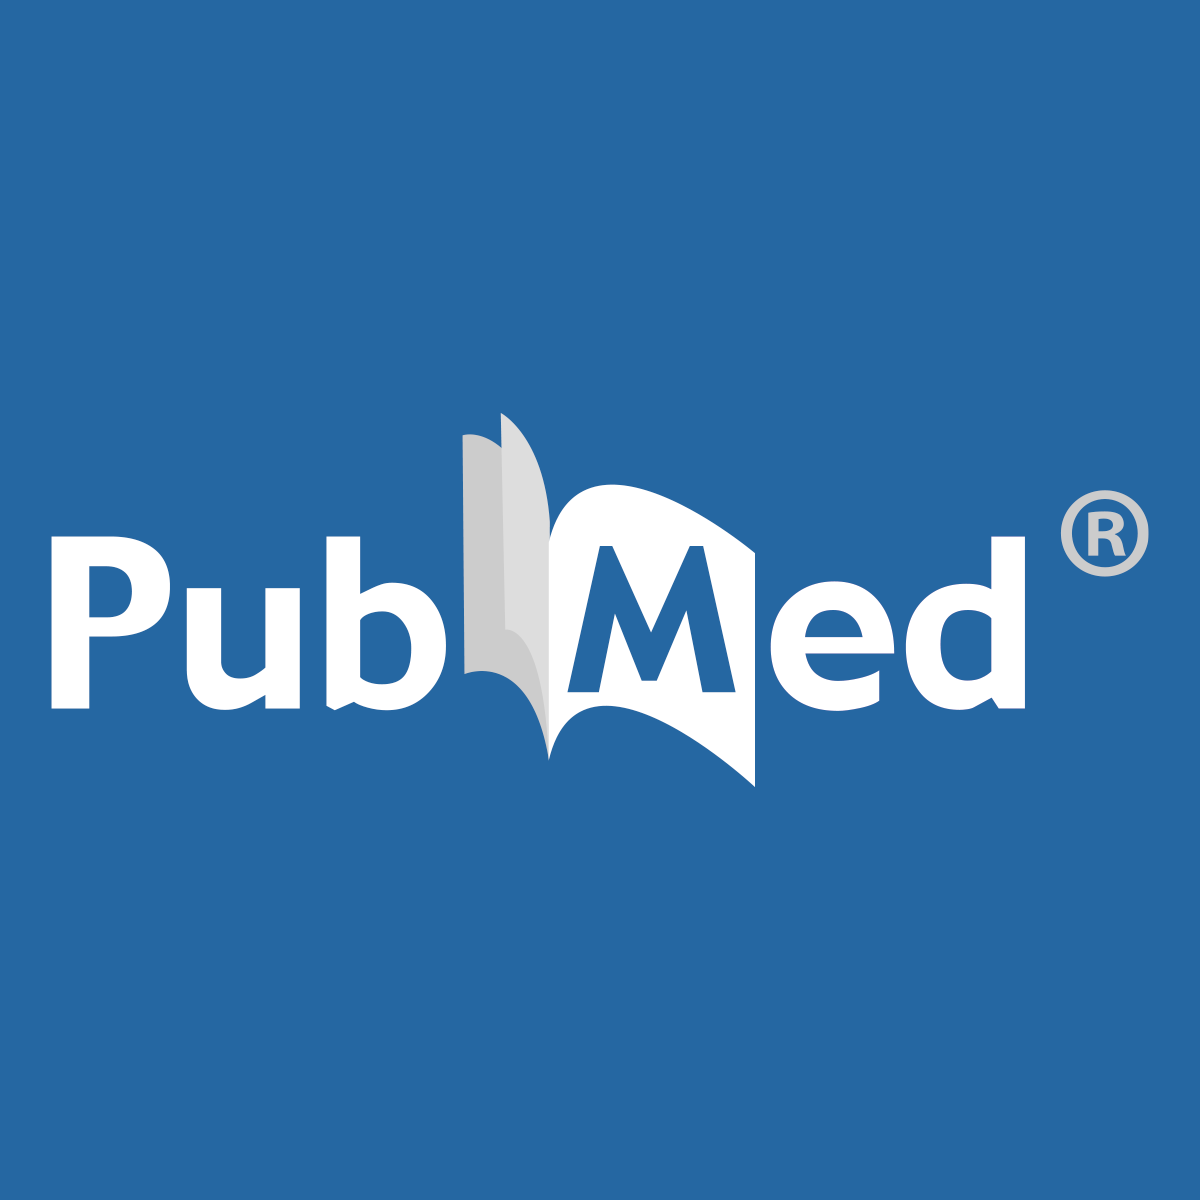 Impact of Antibiotic Exposure Before Immune Checkpoint Inhibitor Treatment on Overall Survival in Older Adults With Cancer: A Population-Based Study - PubMed